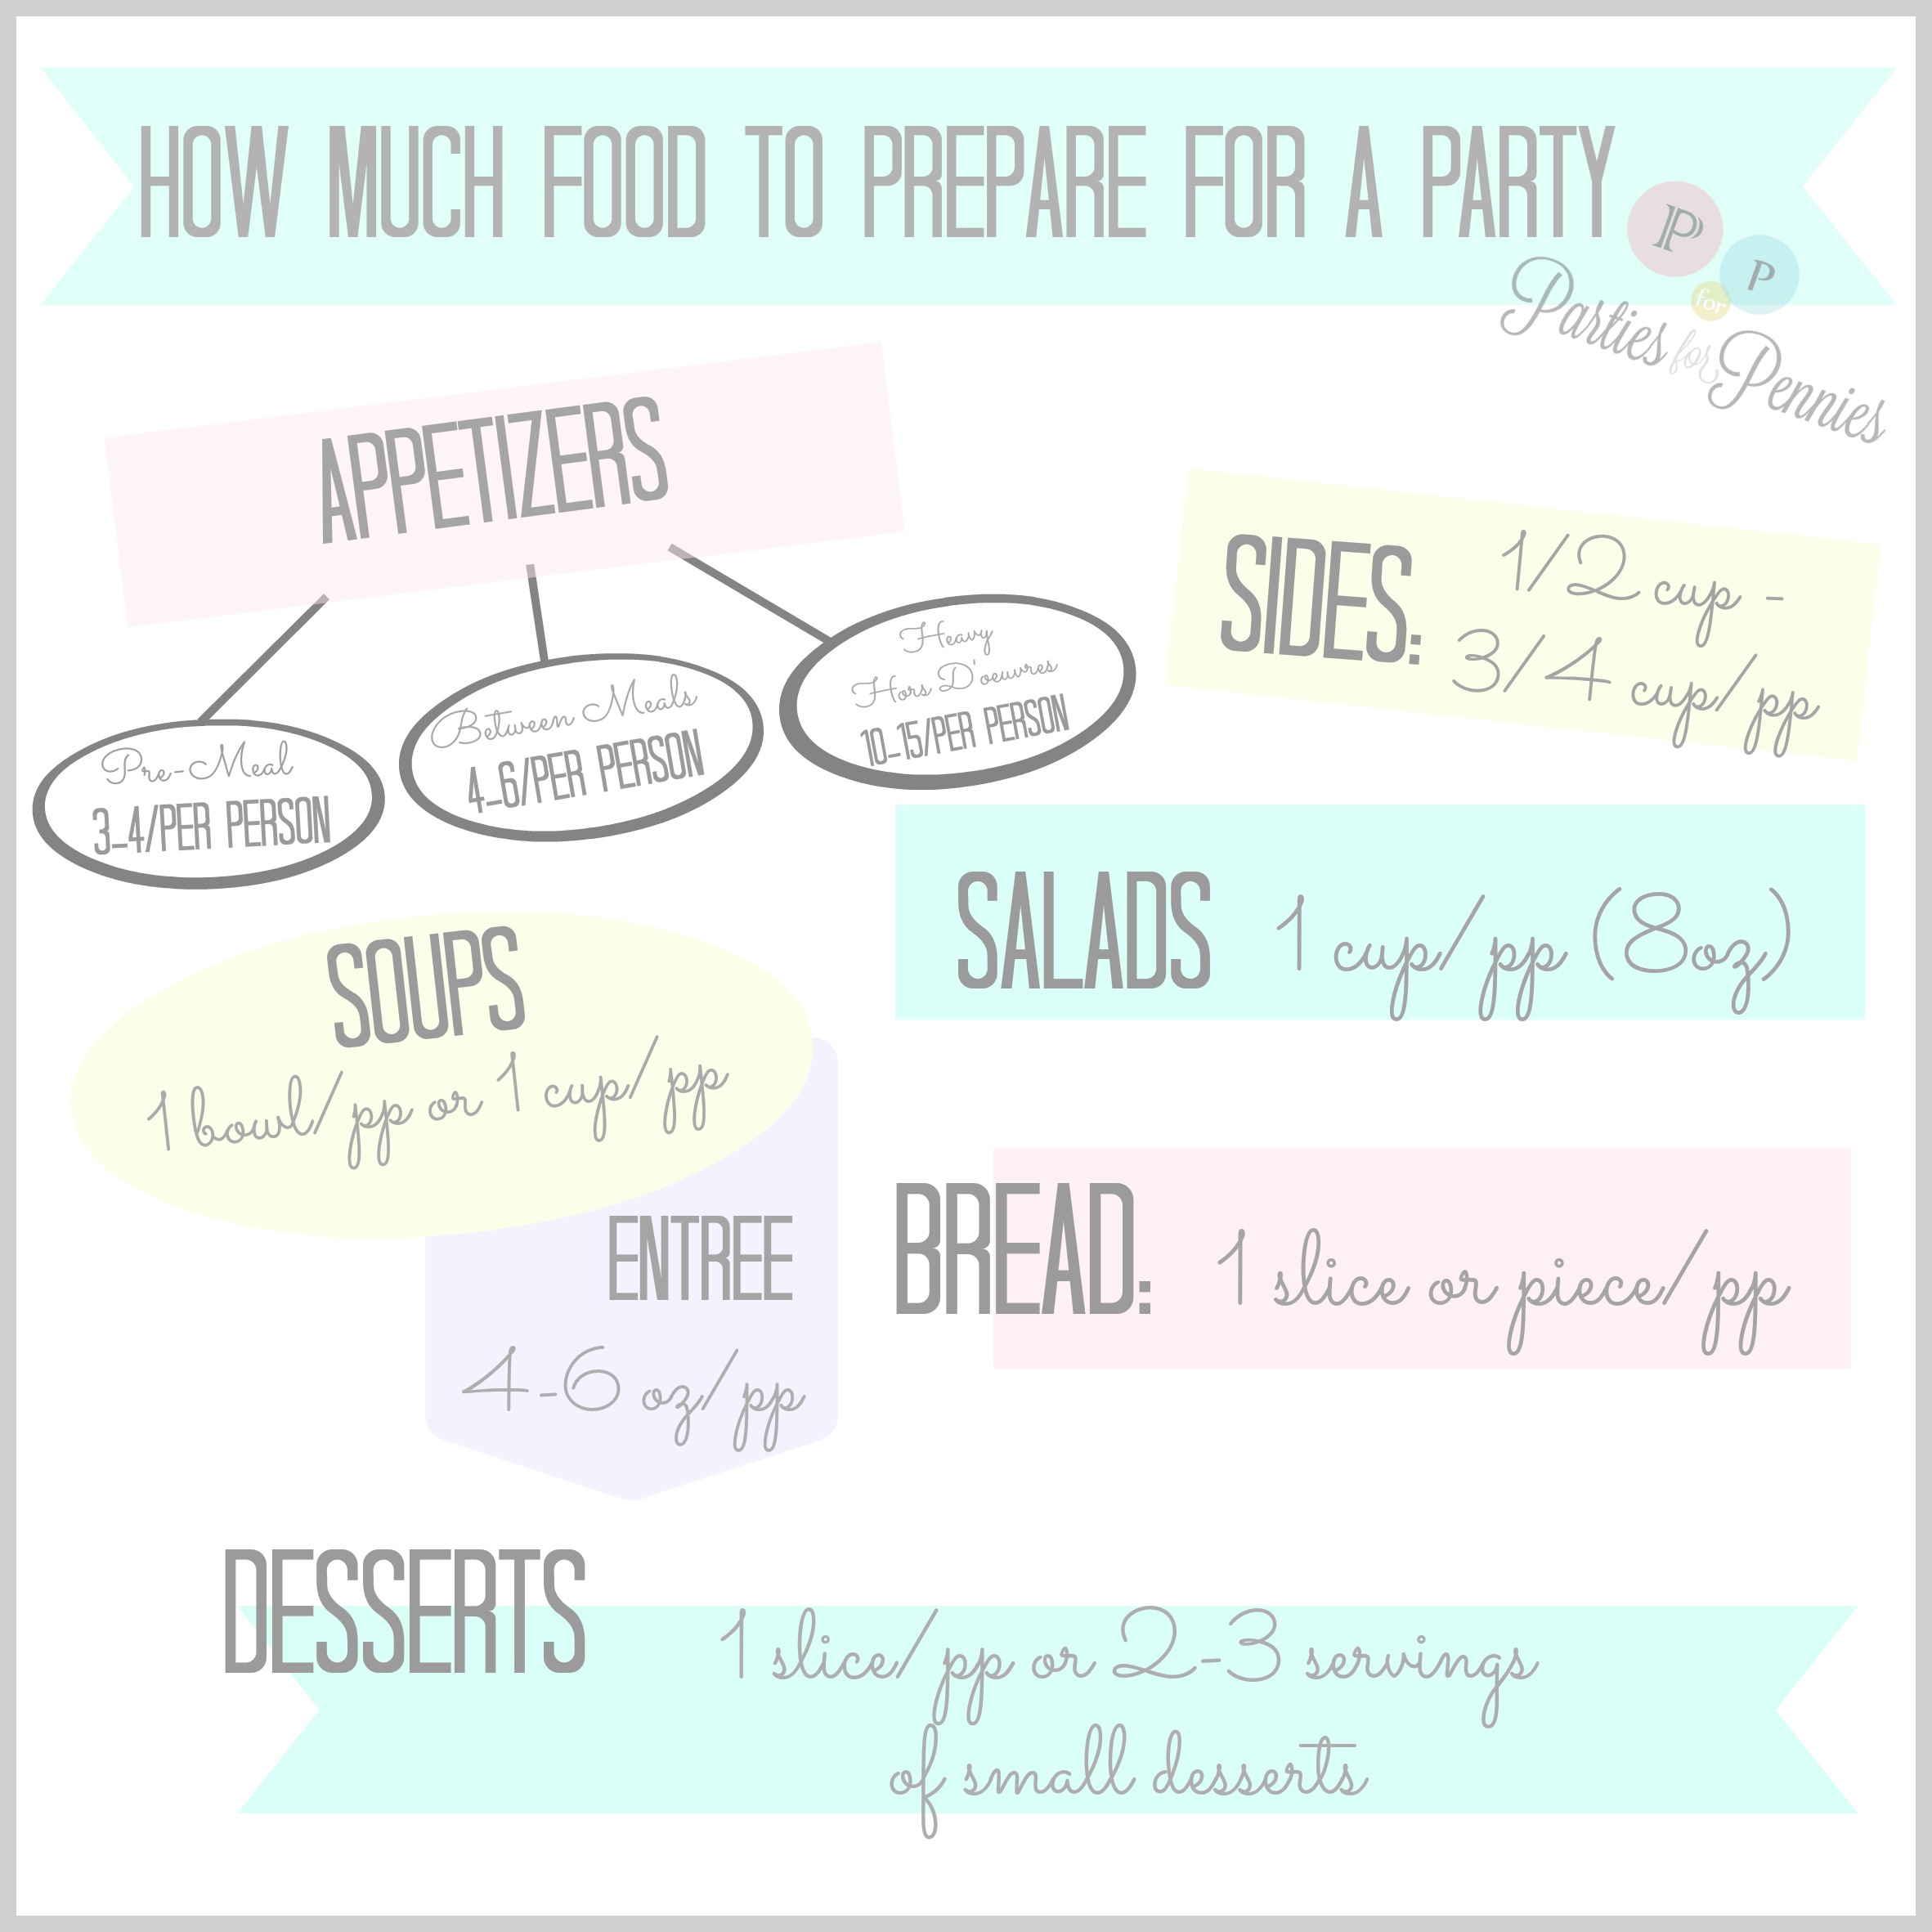 How To Prepare For A Party How Much Food to Prepare for a Party - Parties for Pennies